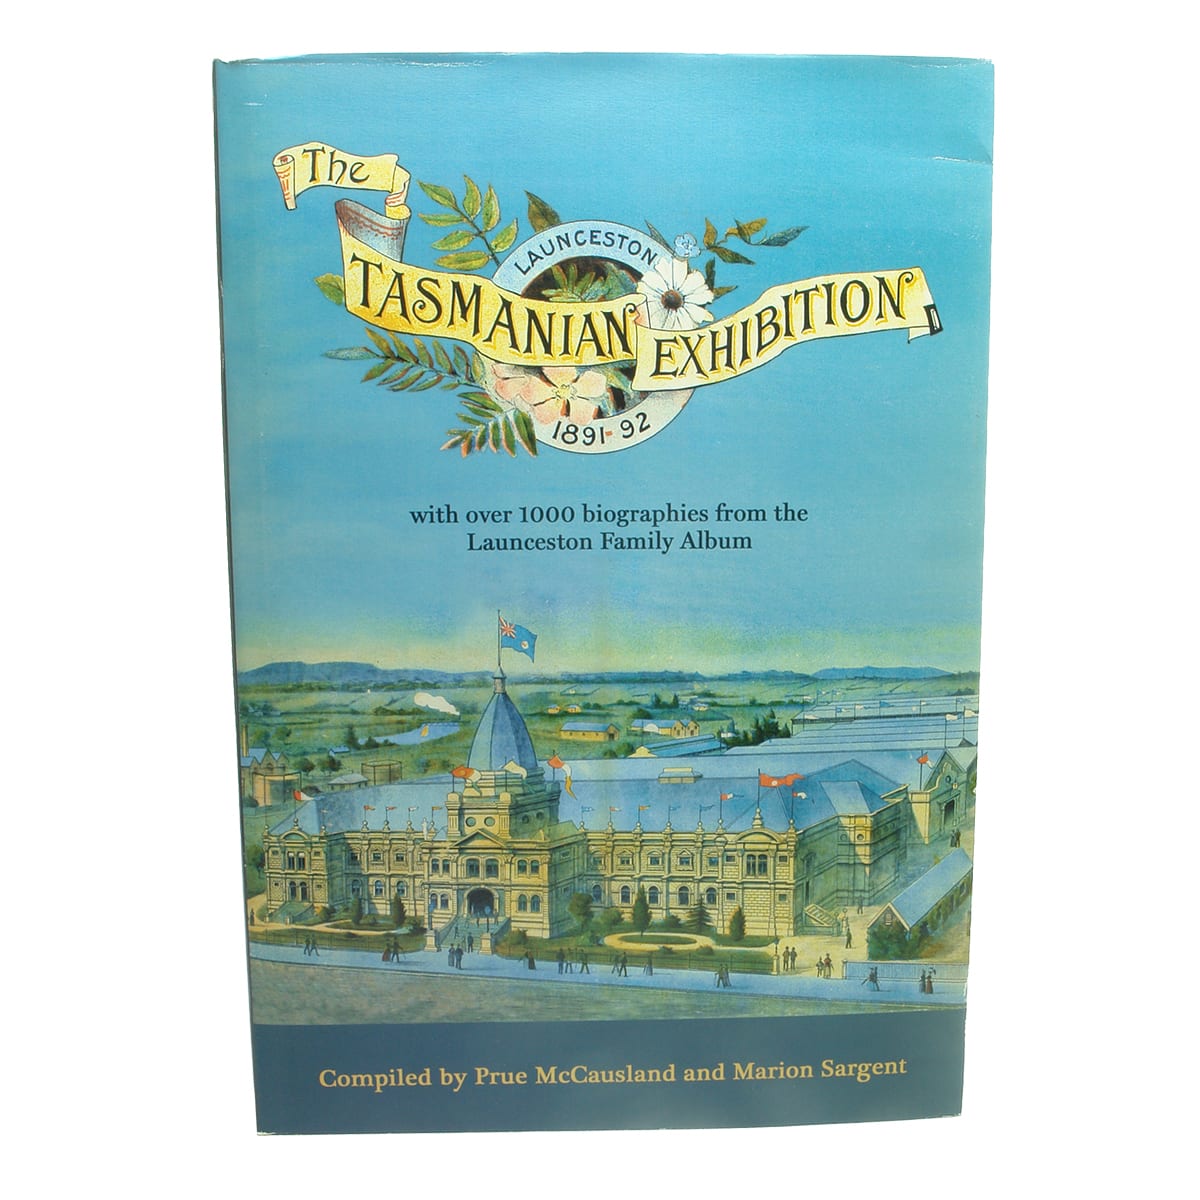 The Tasmanian Exhibition Launceston 1891-92. with over 1000 biographies from the Launceston Family Album. Compiled by Prue McCaushland and Marion Sargent.